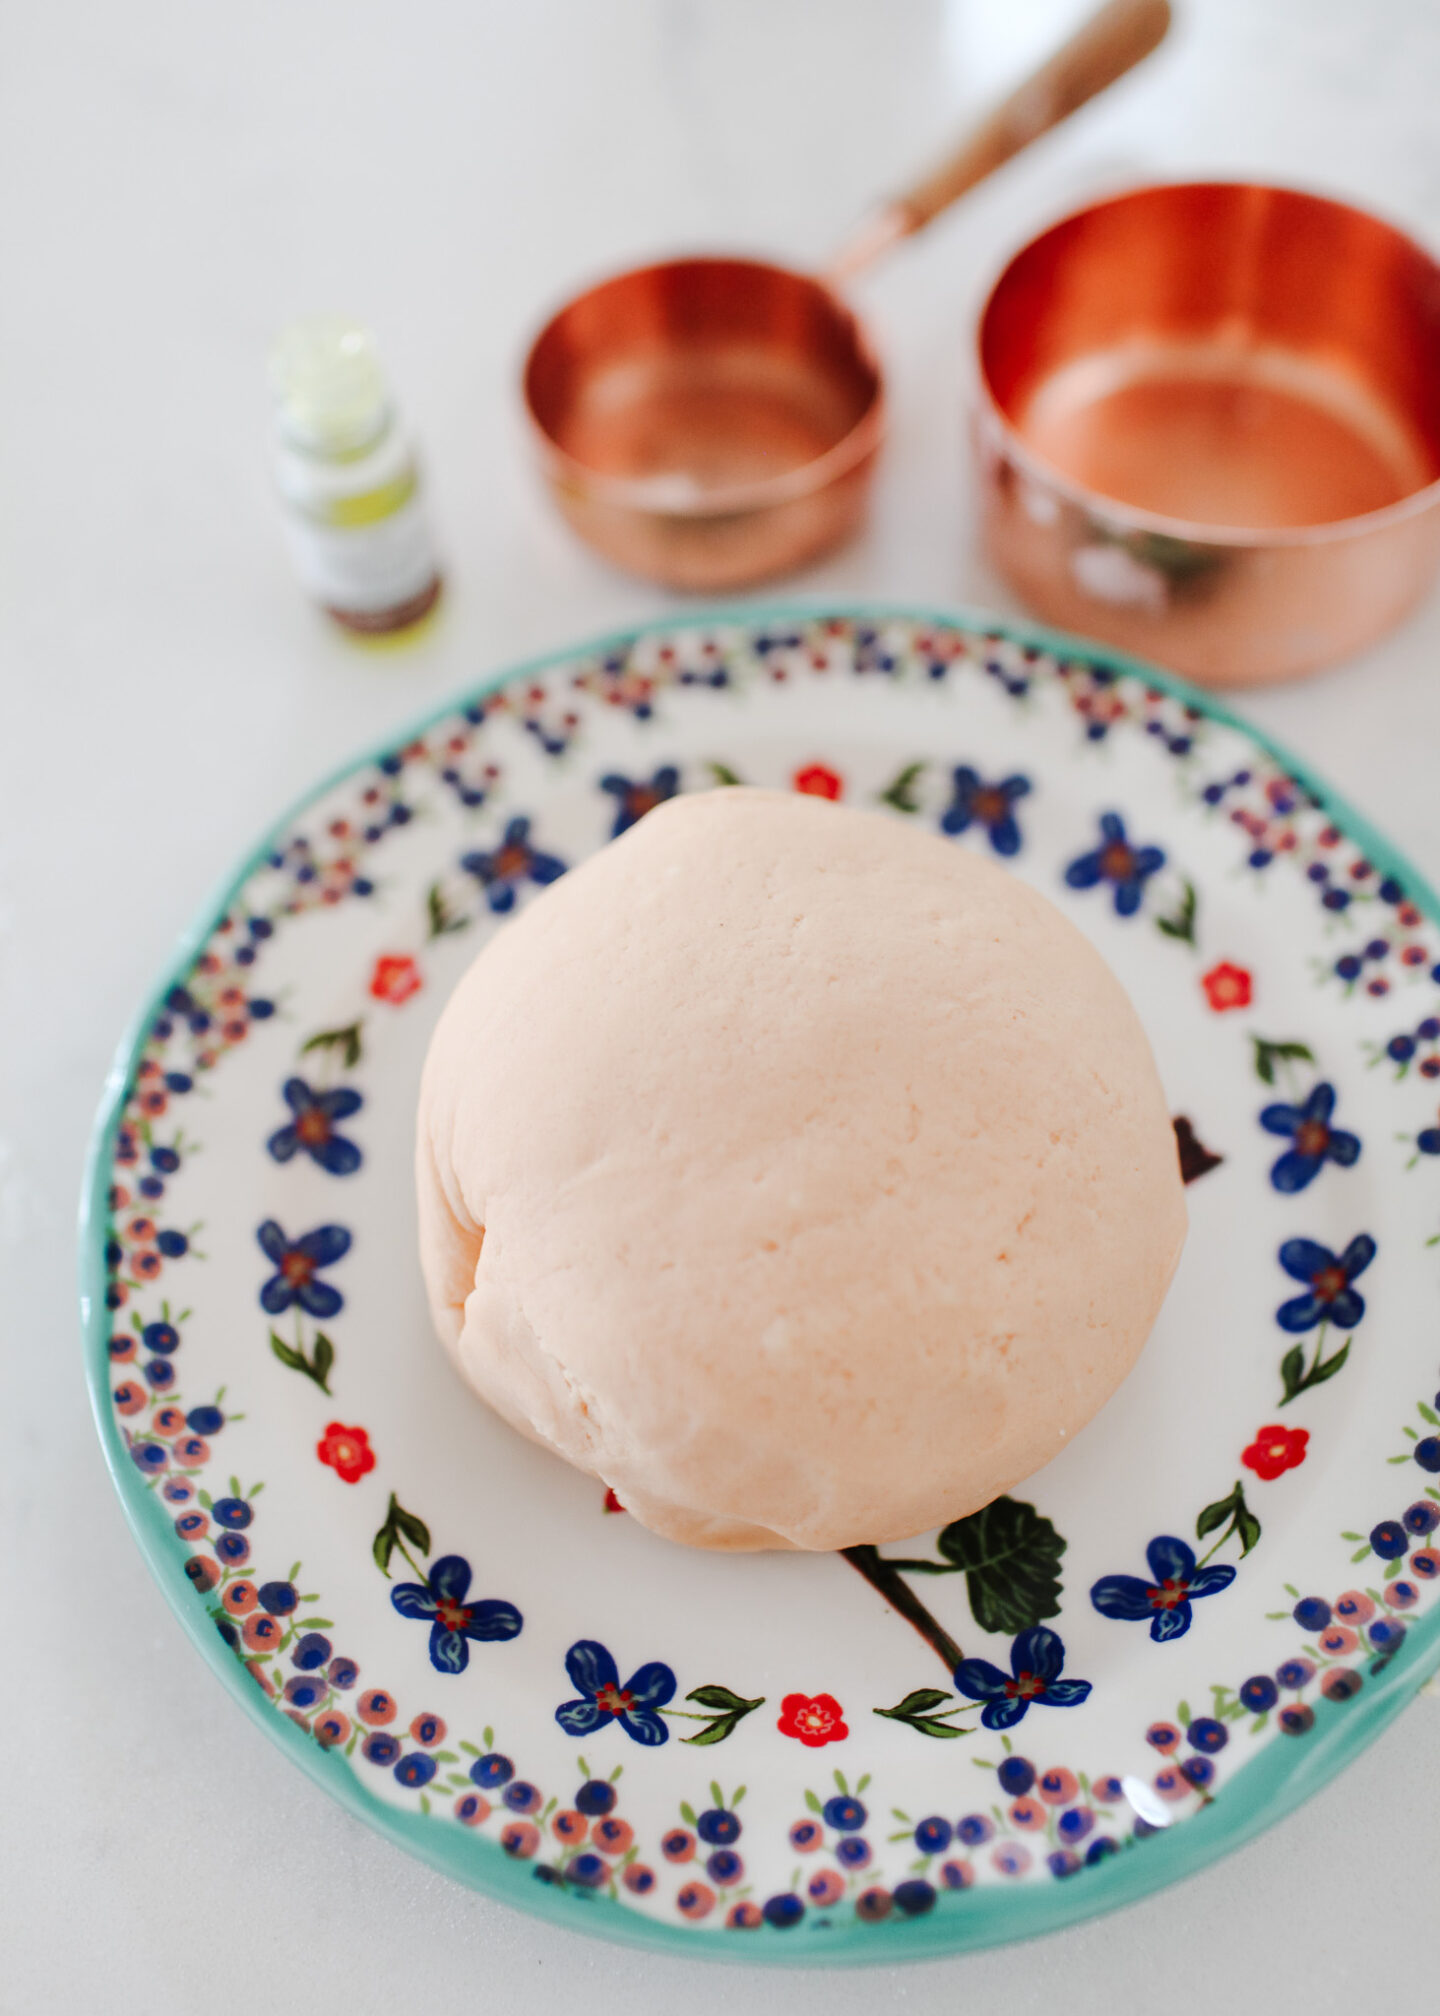 best orange homemade playdough on Anthropologie plate with copper measuring cups